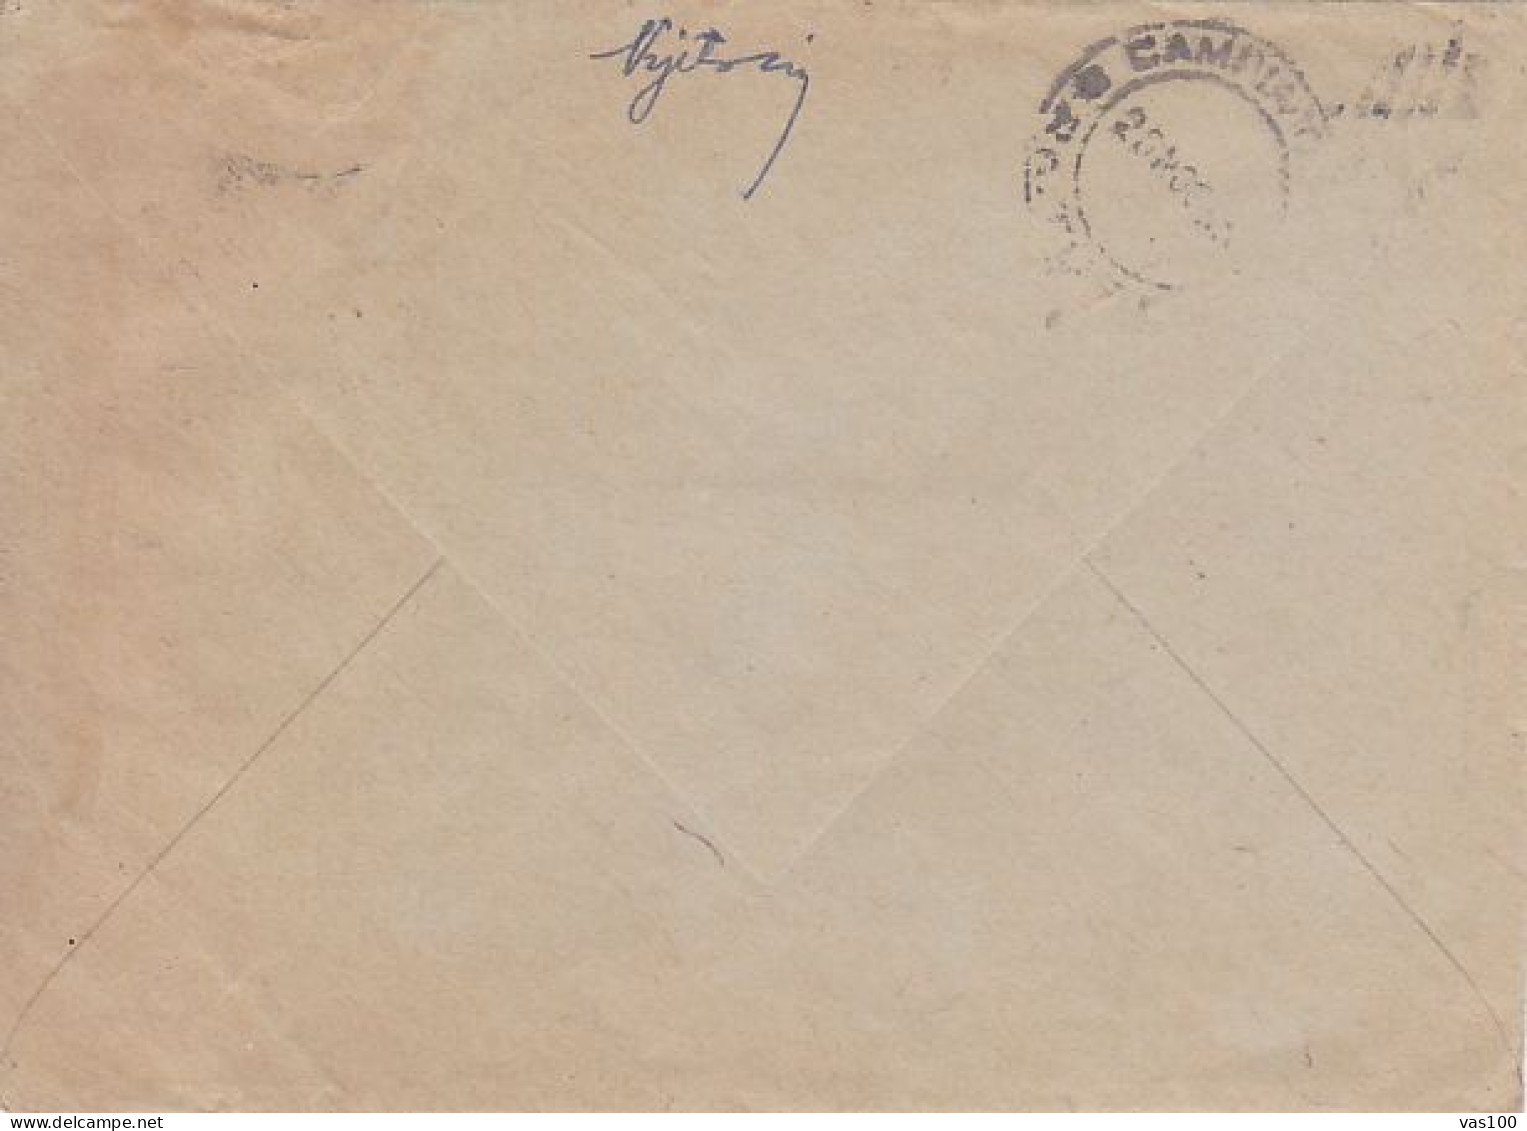 BUCHAREST YOUTH PIONEERS PALACE, STAMP ON COVER, 1951, ROMANIA - Cartas & Documentos